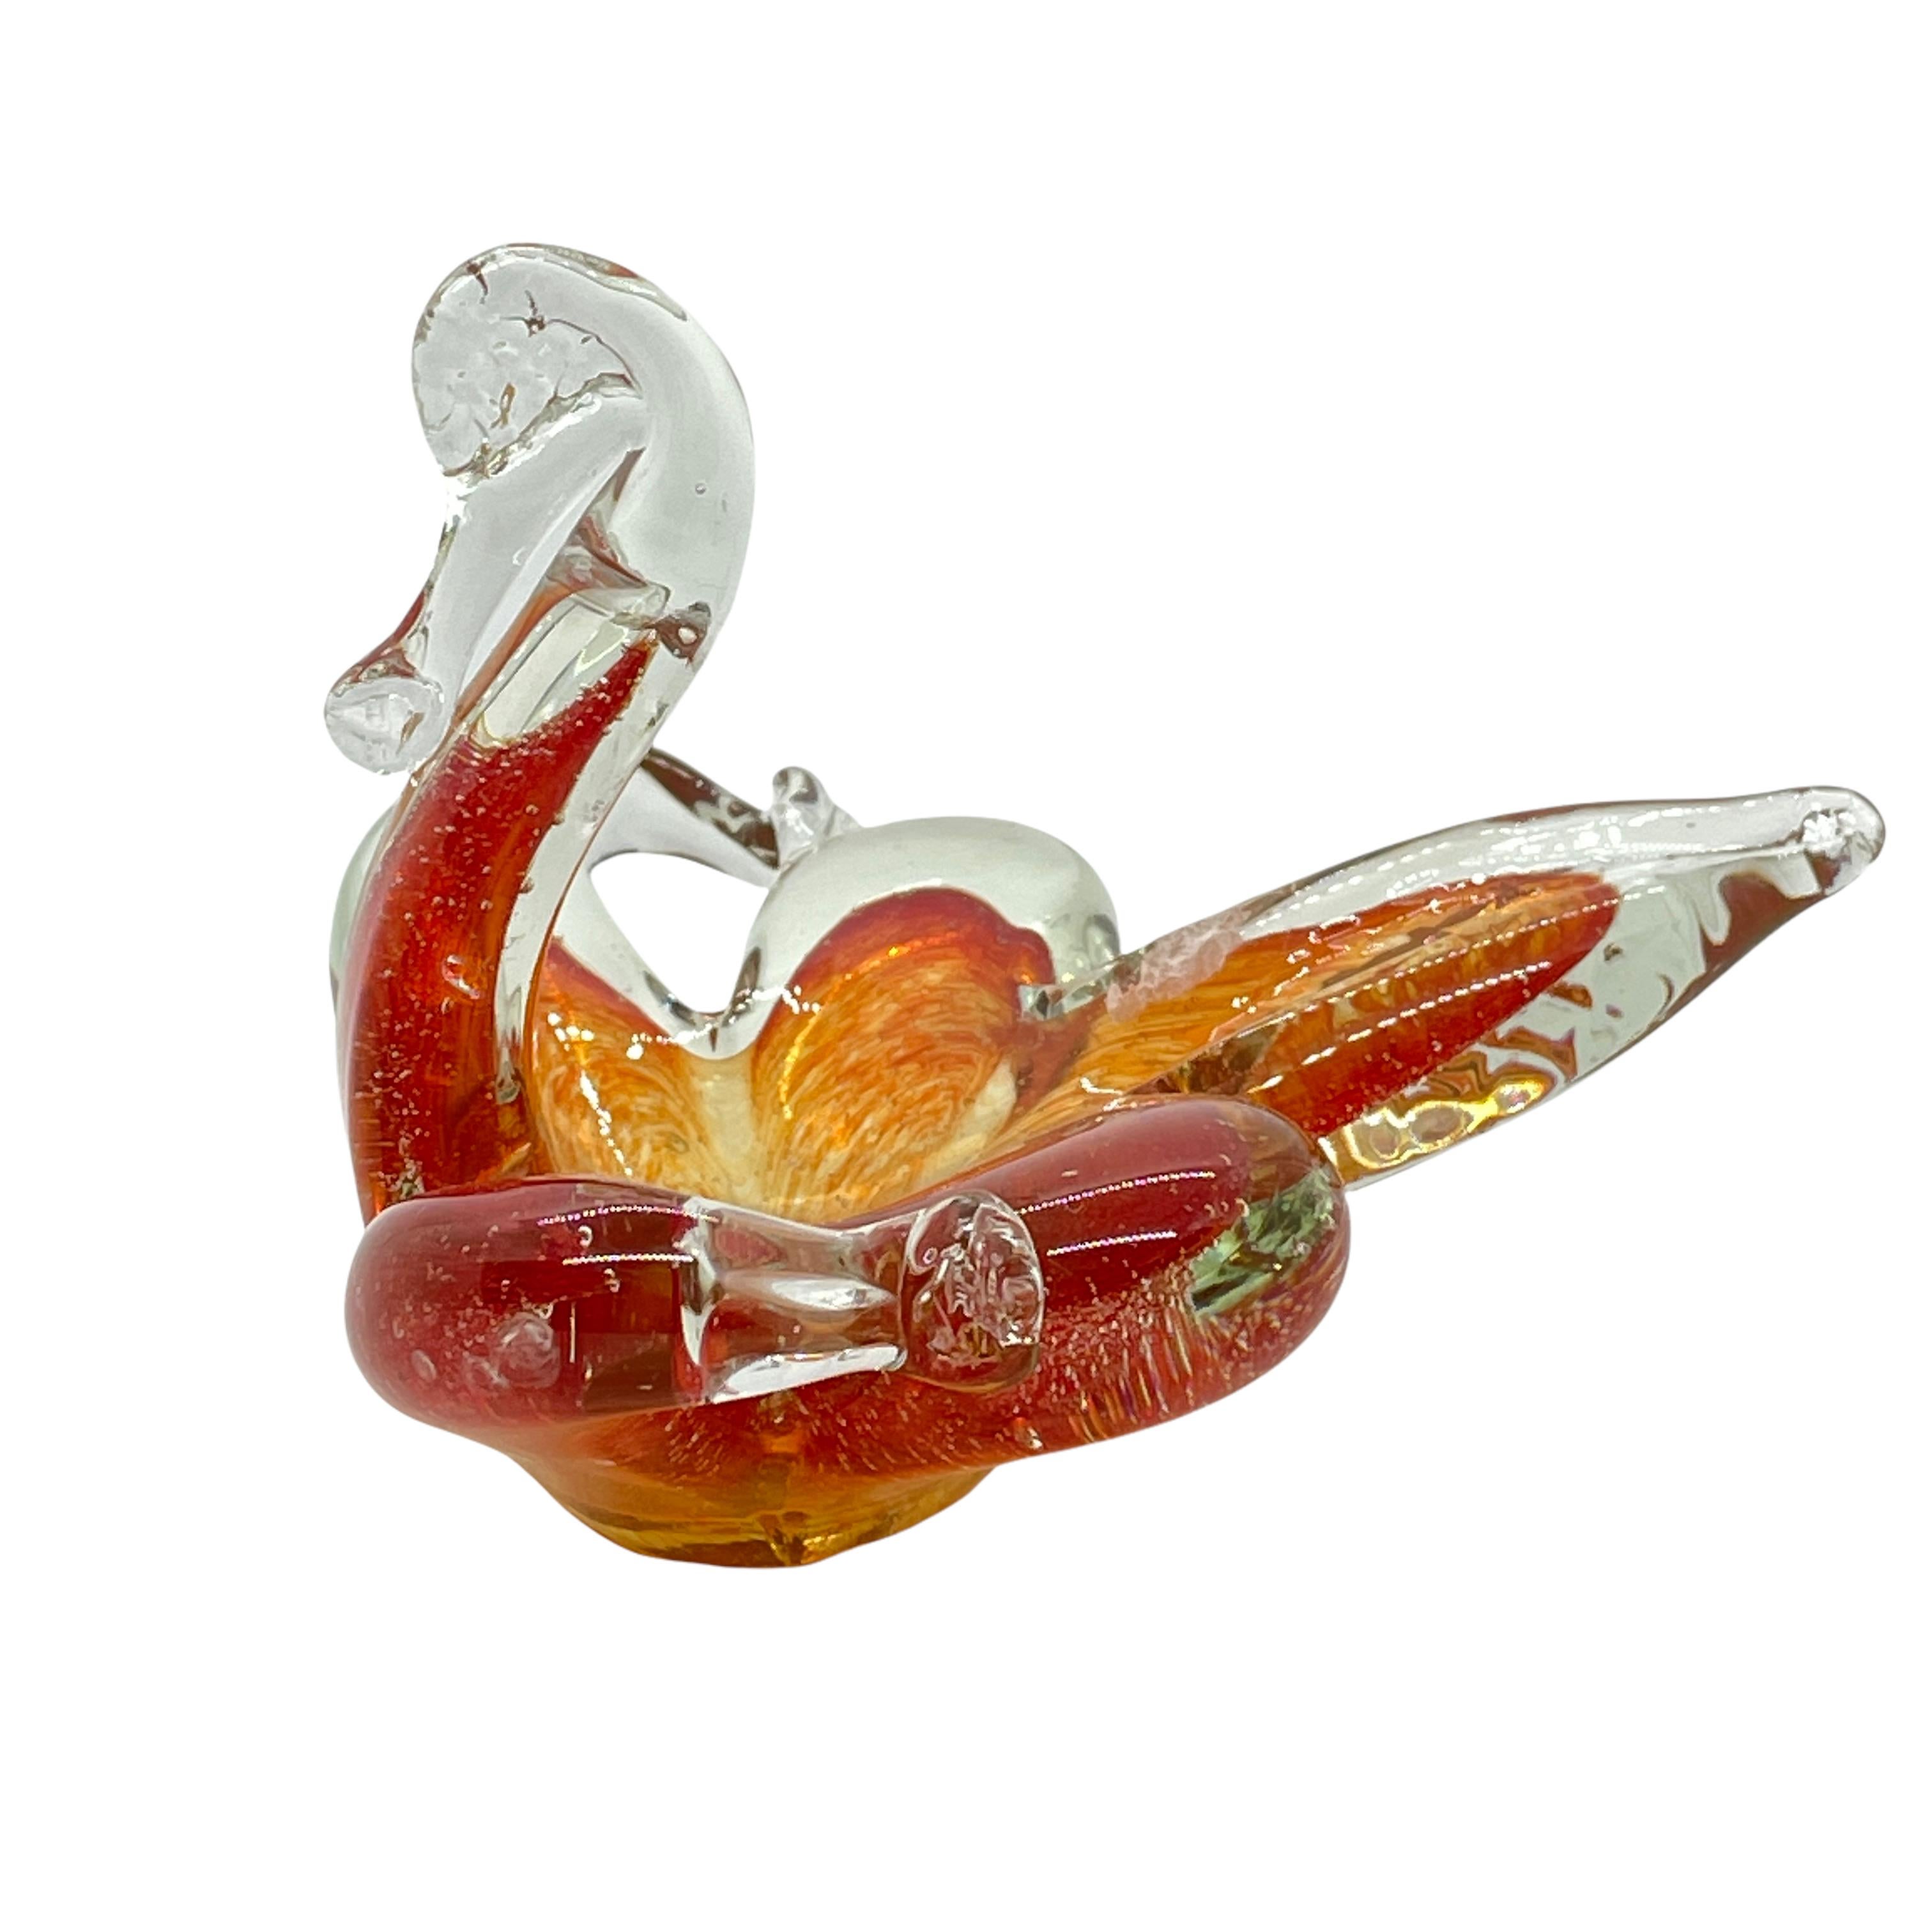 Gorgeous hand blown Murano art glass piece with Sommerso and bullicante techniques. A beautiful organic shaped bowl, catchall, Venice, Murano, Italy, 1960s.